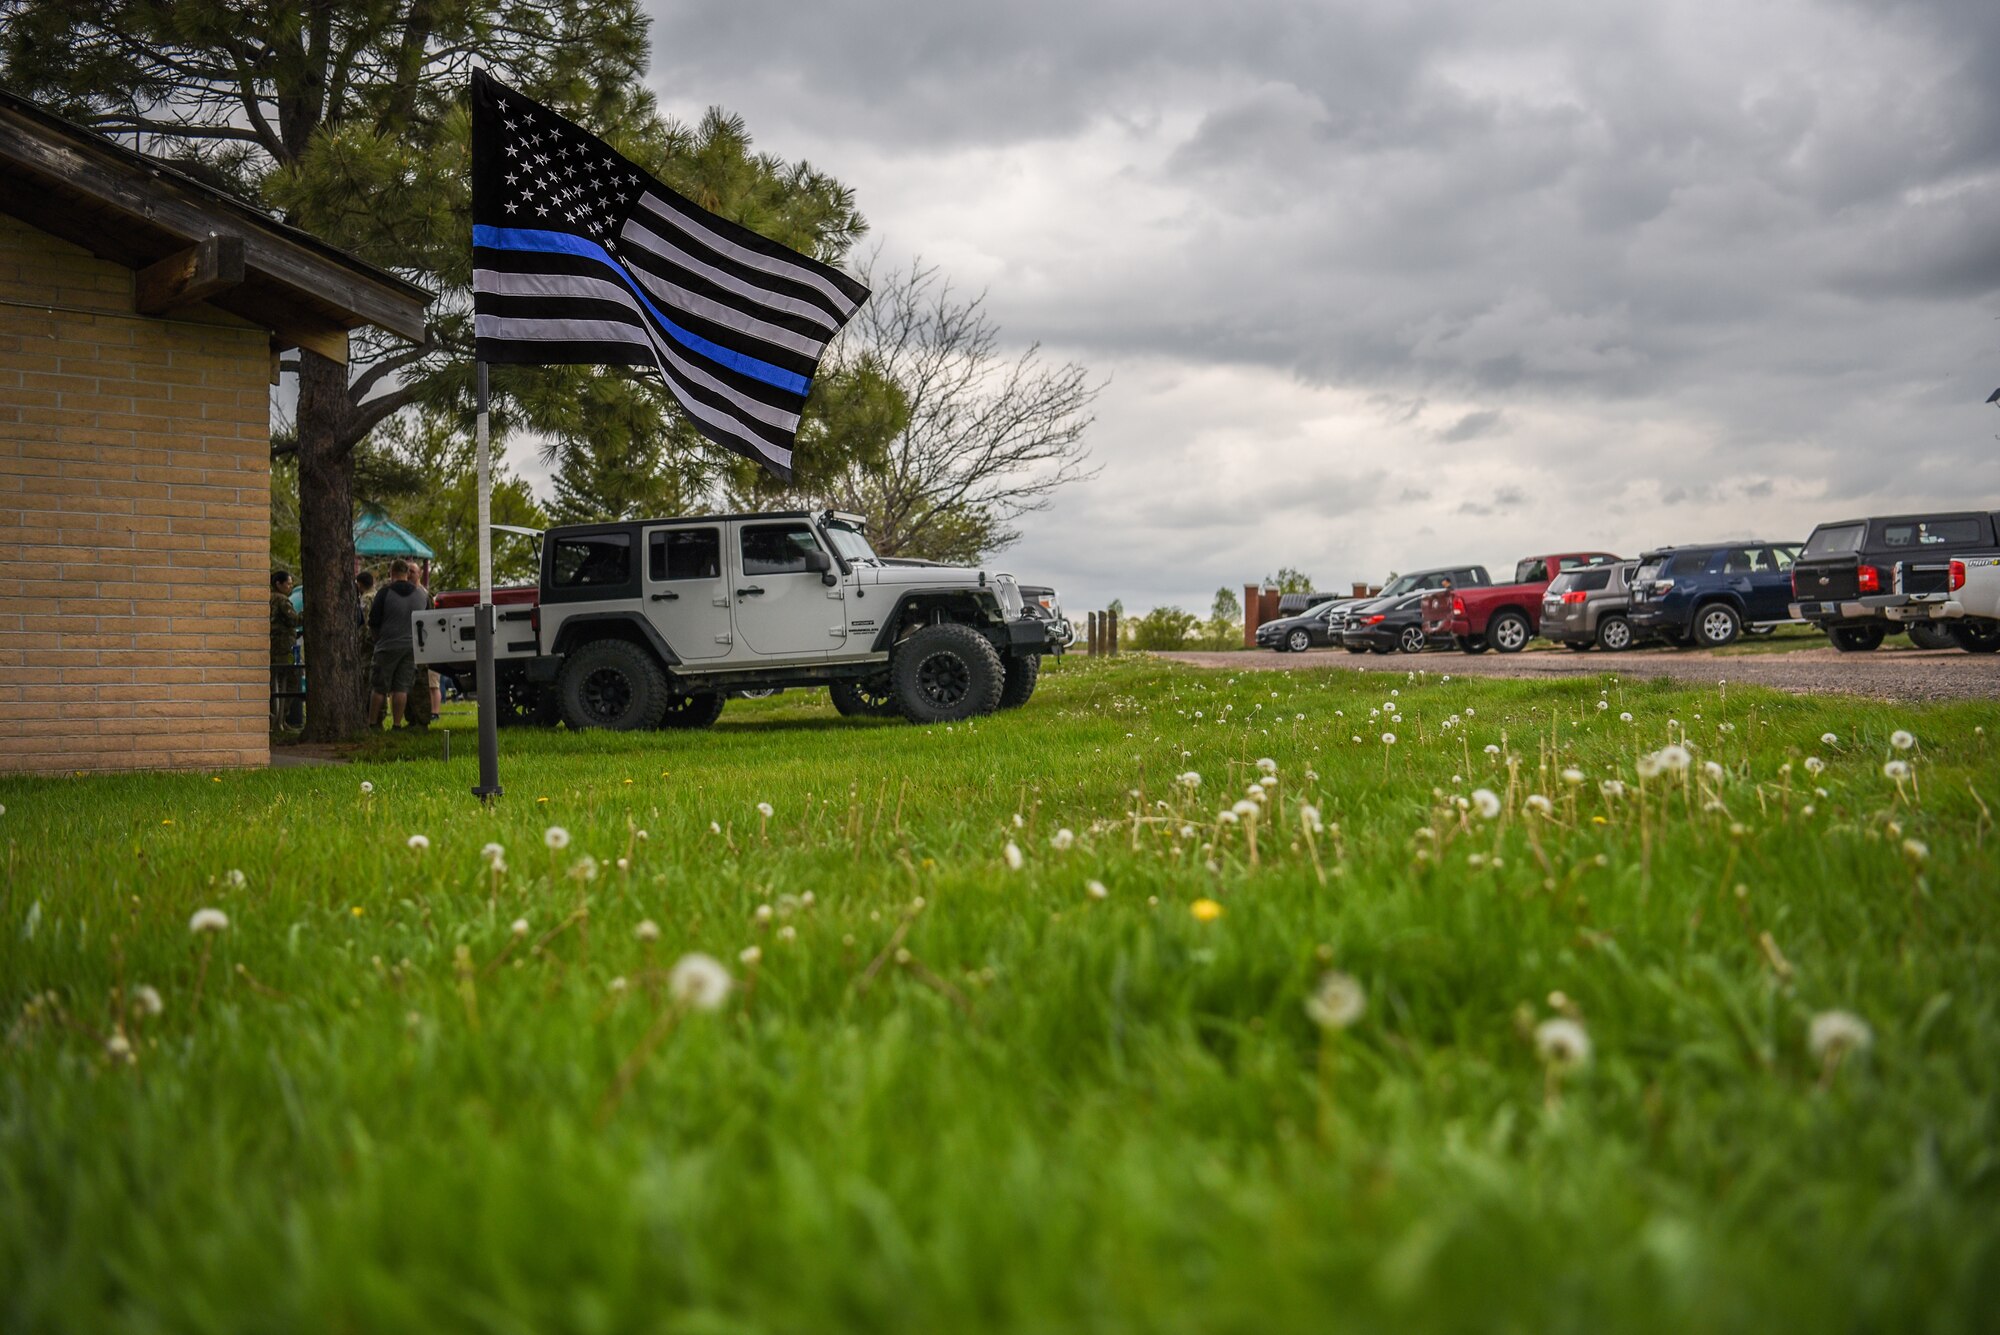 The Thin Blue Line Flag waves in the wind during a barbecue for the closing of Police Week, May 18, 2018, on F.E. Warren Air Force Base, Wyo. Police Week concluded with festivities for Airmen and families to unwind after a week of events and work. In 1962, President John F. Kennedy signed a proclamation which designated May 15 as Peace Officers Memorial Day and the week in which that date falls as Police Week. People all across the United States participate in various events which honor those have paid the ultimate sacrifice. (U.S. Air Force photo by Airman 1st Class Braydon Williams)